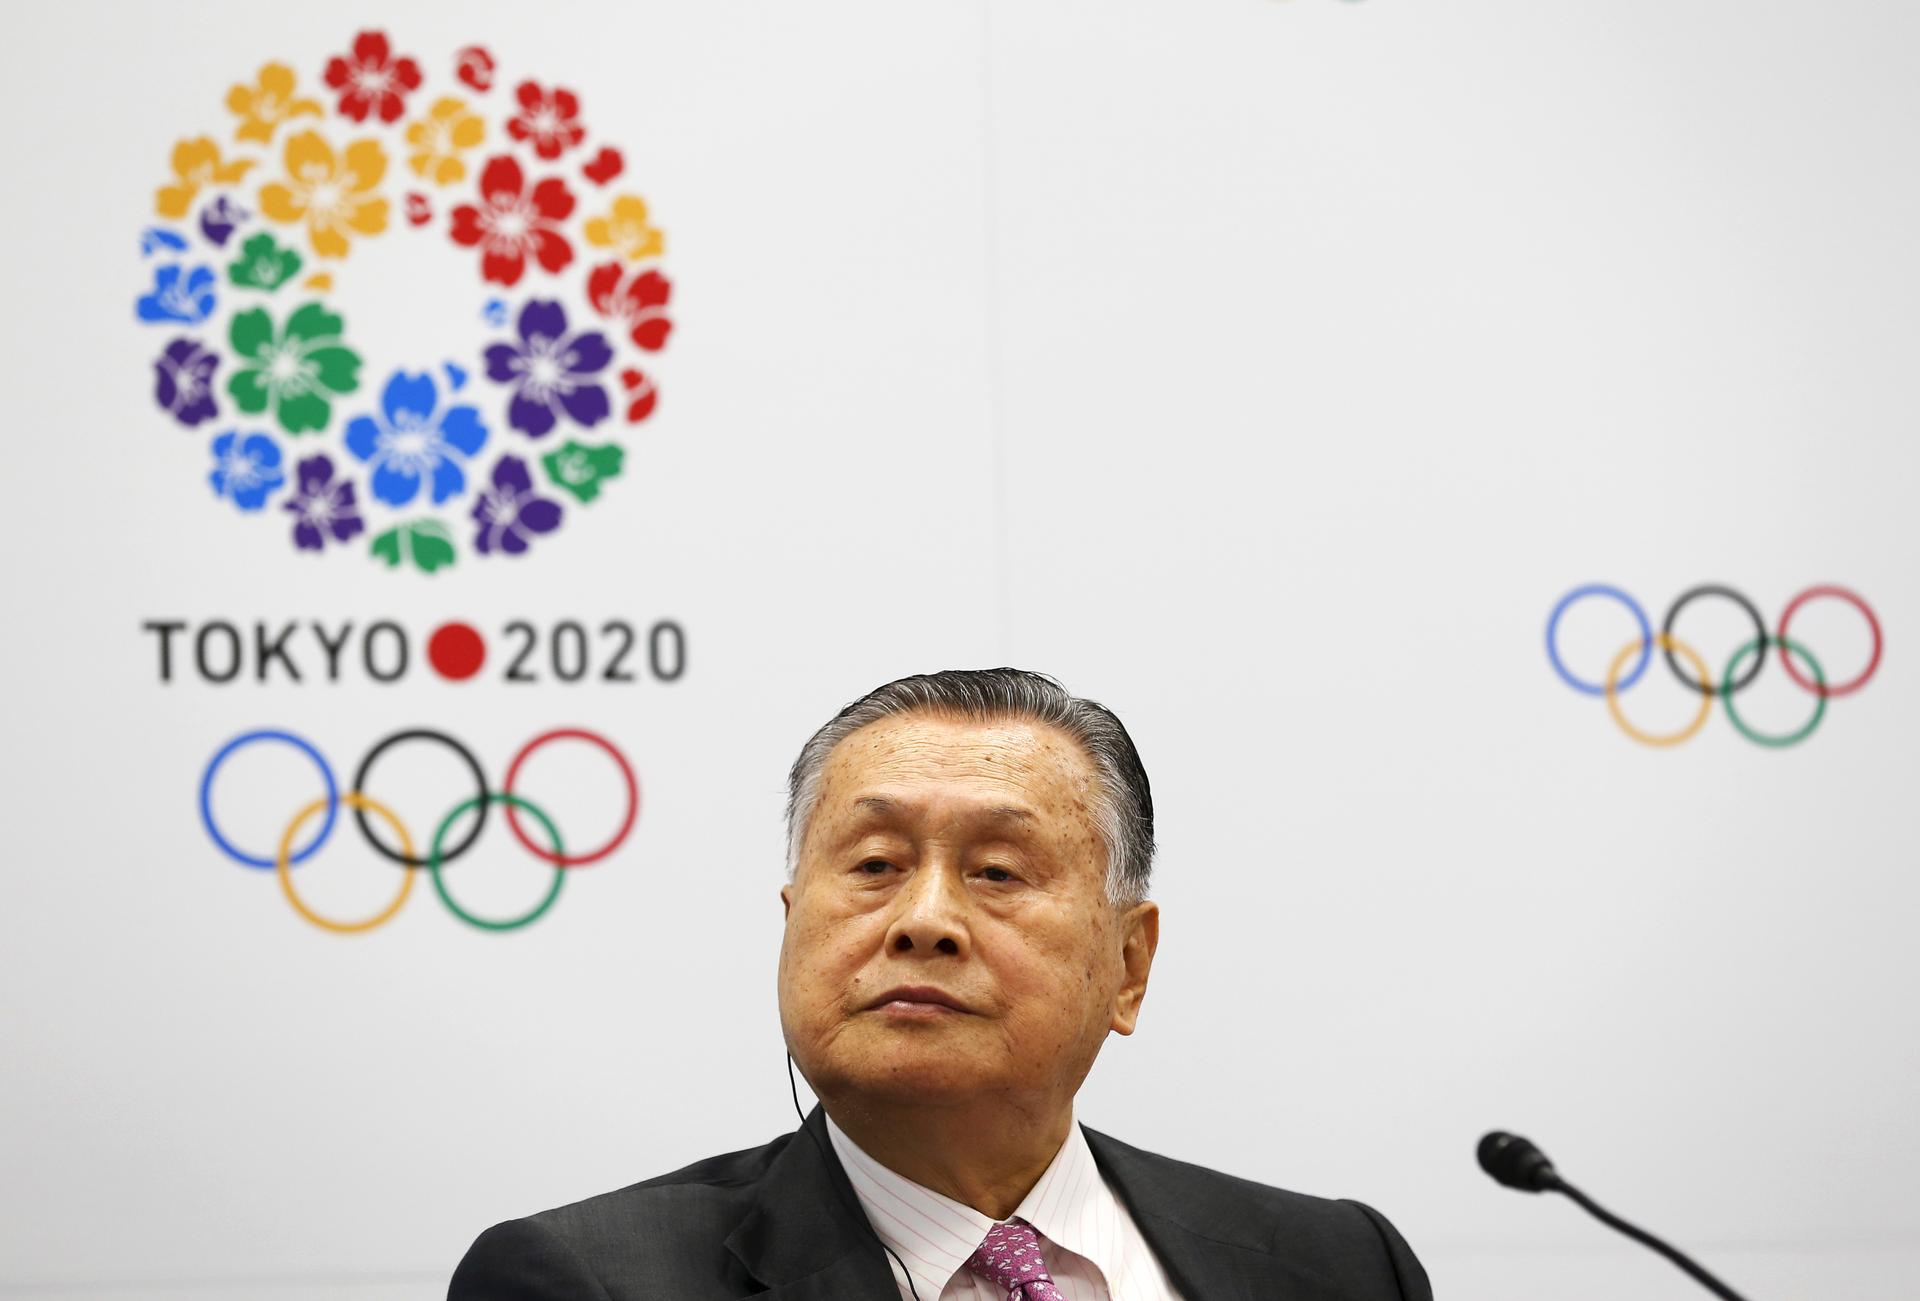 President of the Tokyo 2020 Organizing Committee